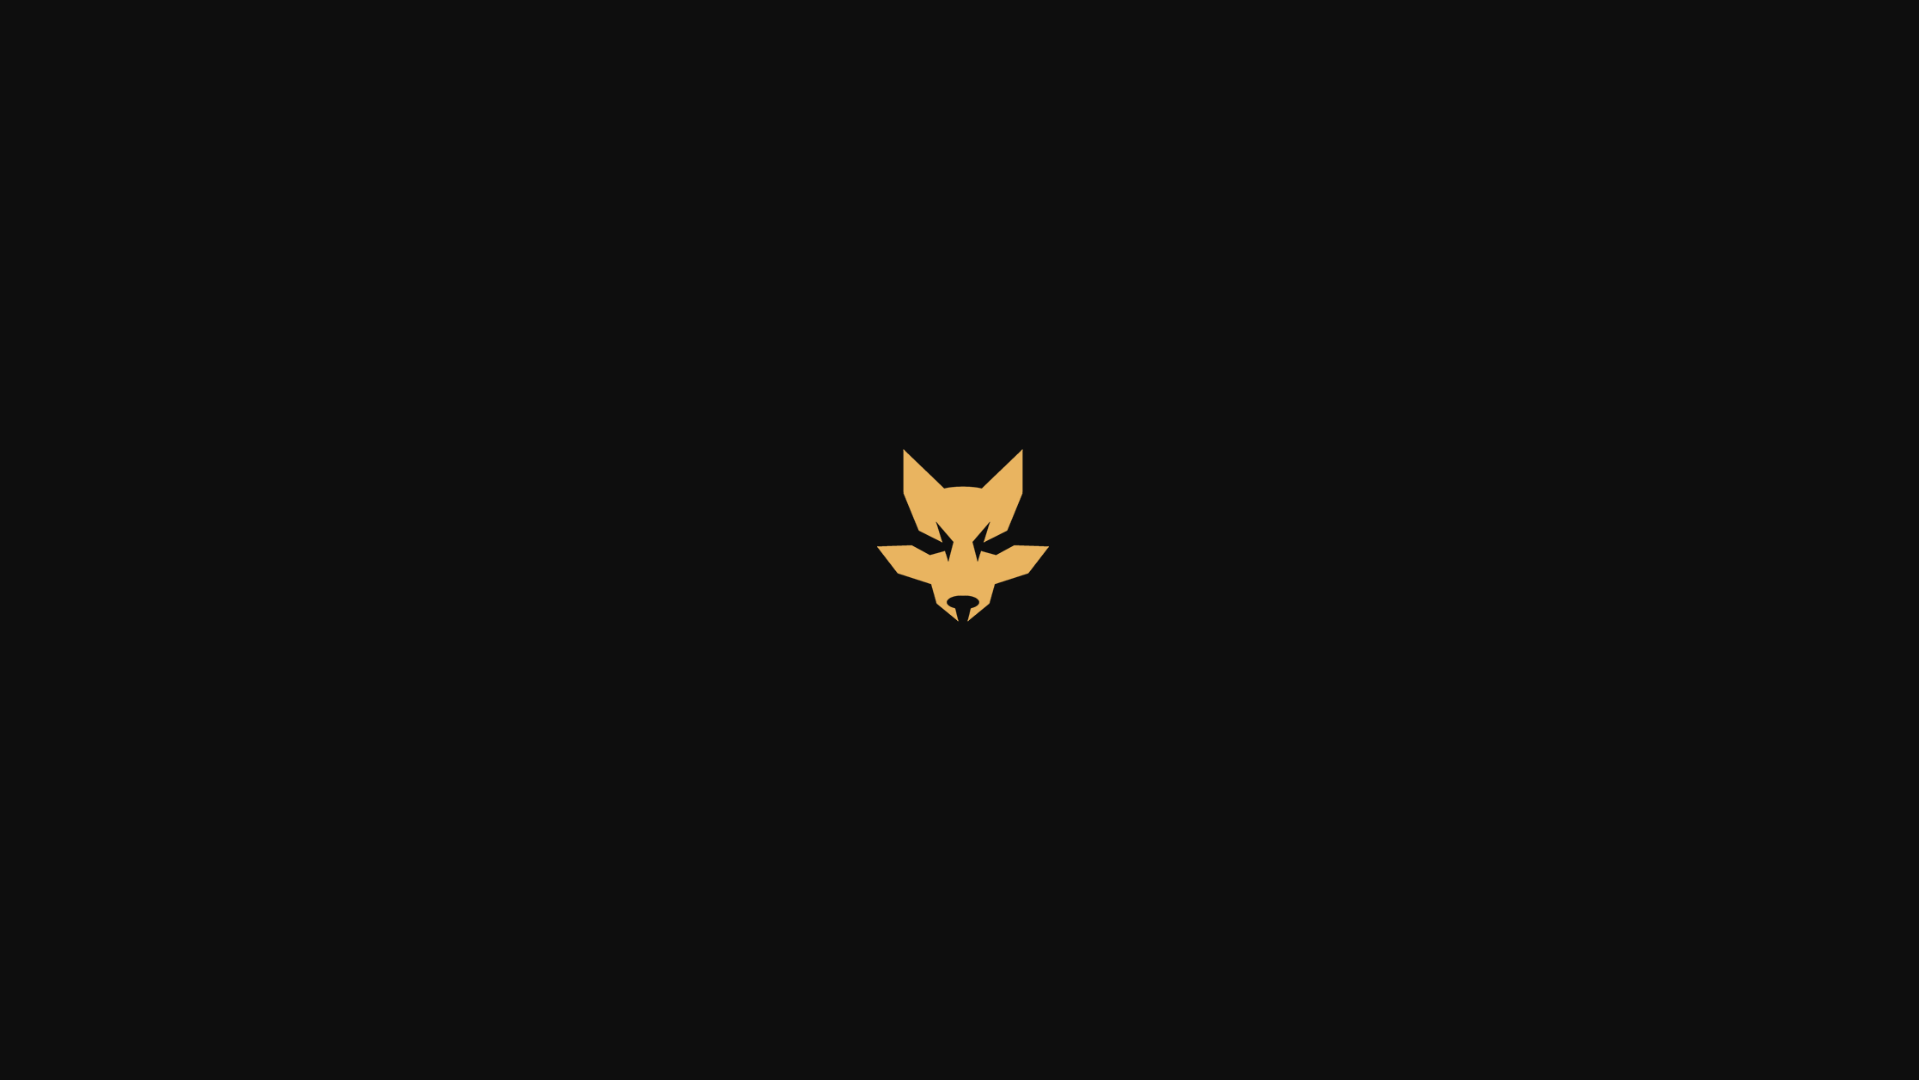 Simple Hunter Logo wallpaper that I made.: thedivision